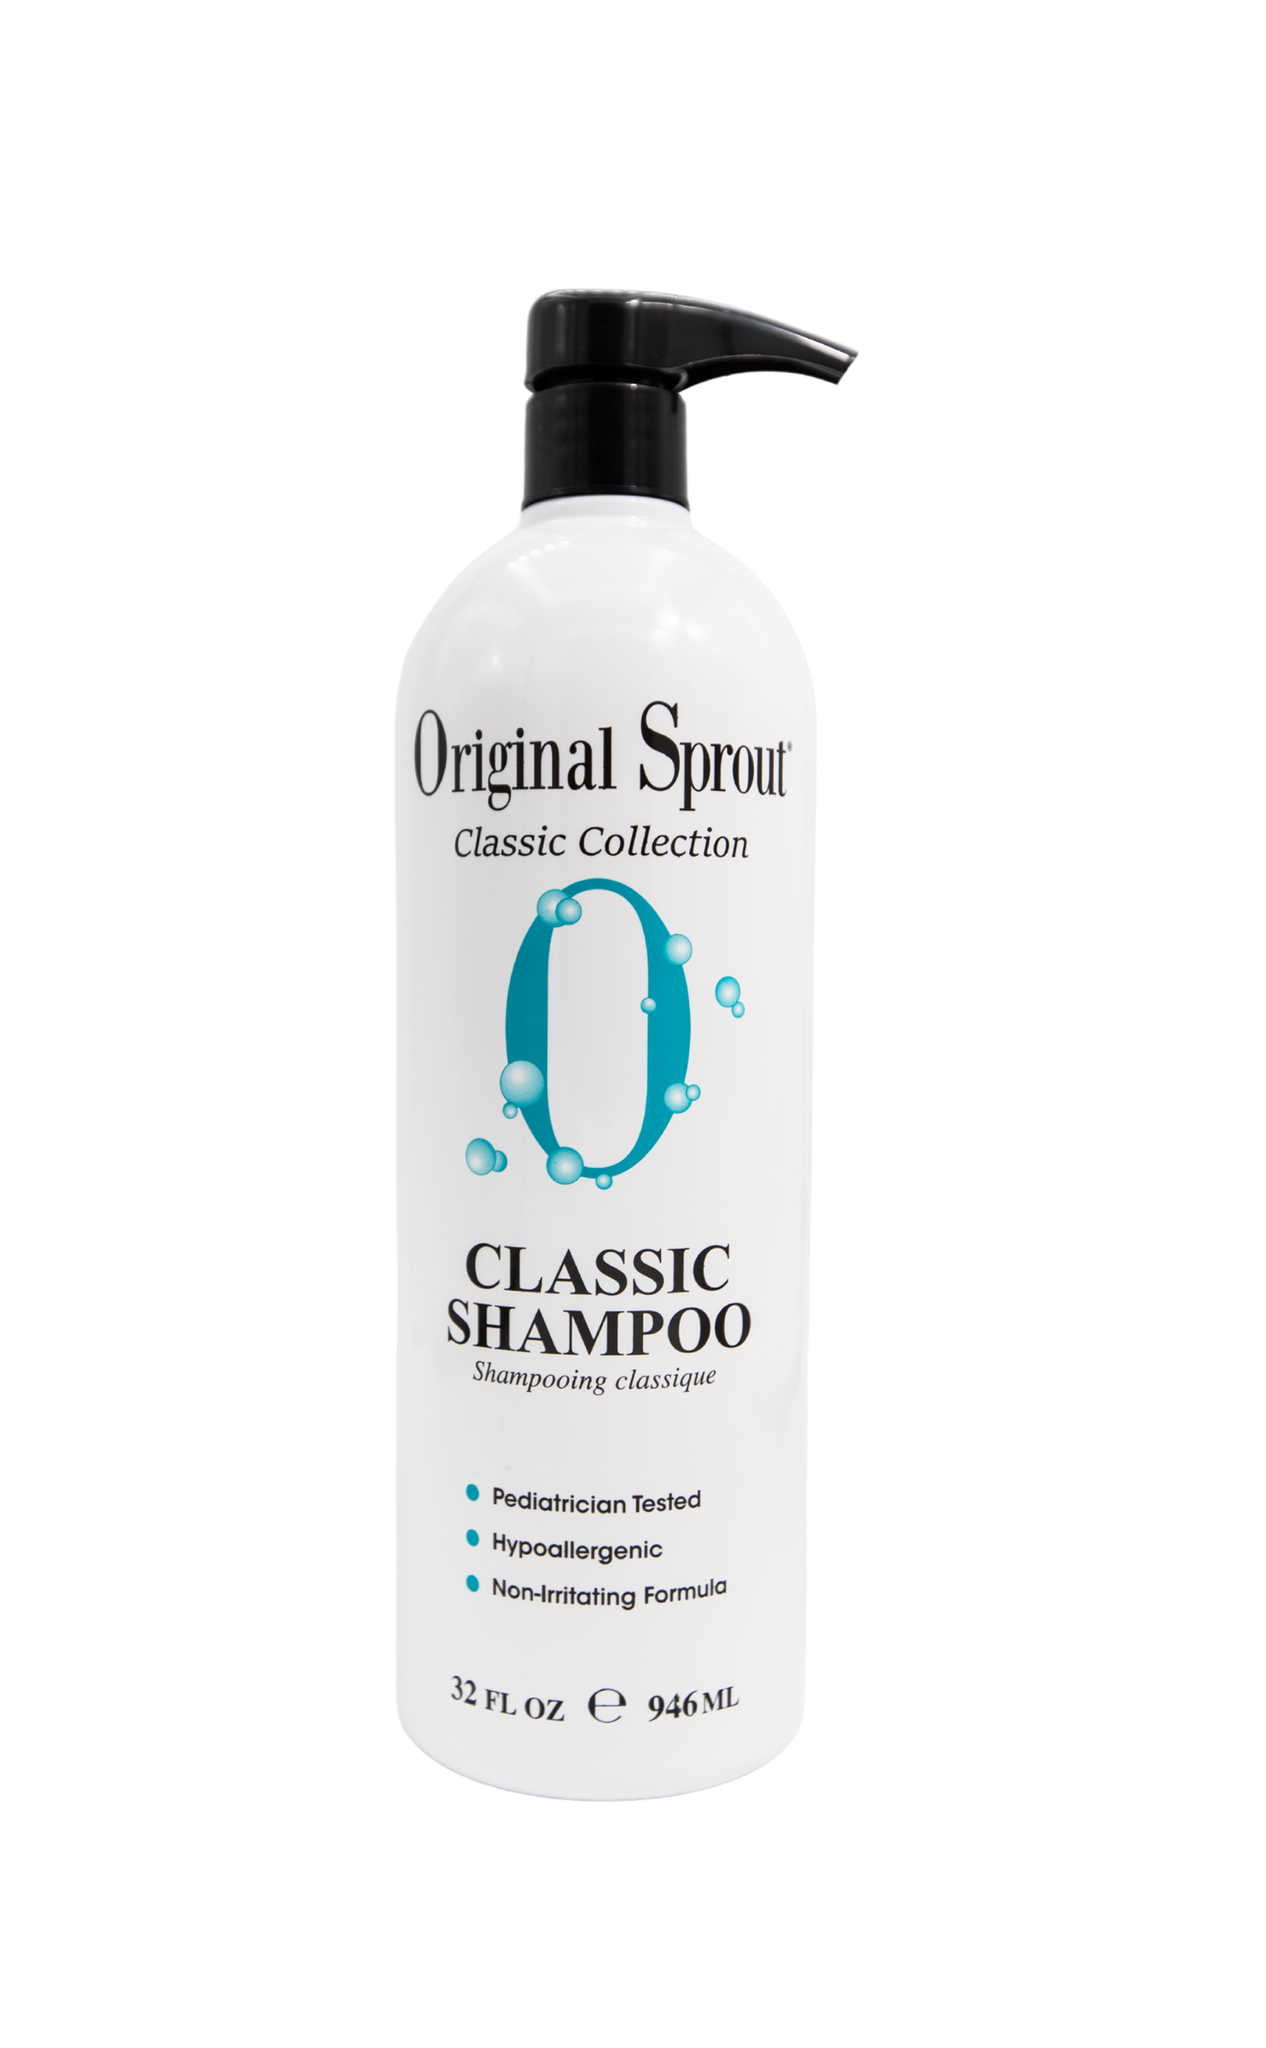 Original Sprout Classic Shampoo, Hair Products for Baby?s, Toddler?s, Kids, & Adult Women & Men, Helps Alleviate Dandruff or Dry Scalp, Sulfate Free (32 oz) 33 Fl Oz (Pack of 1)